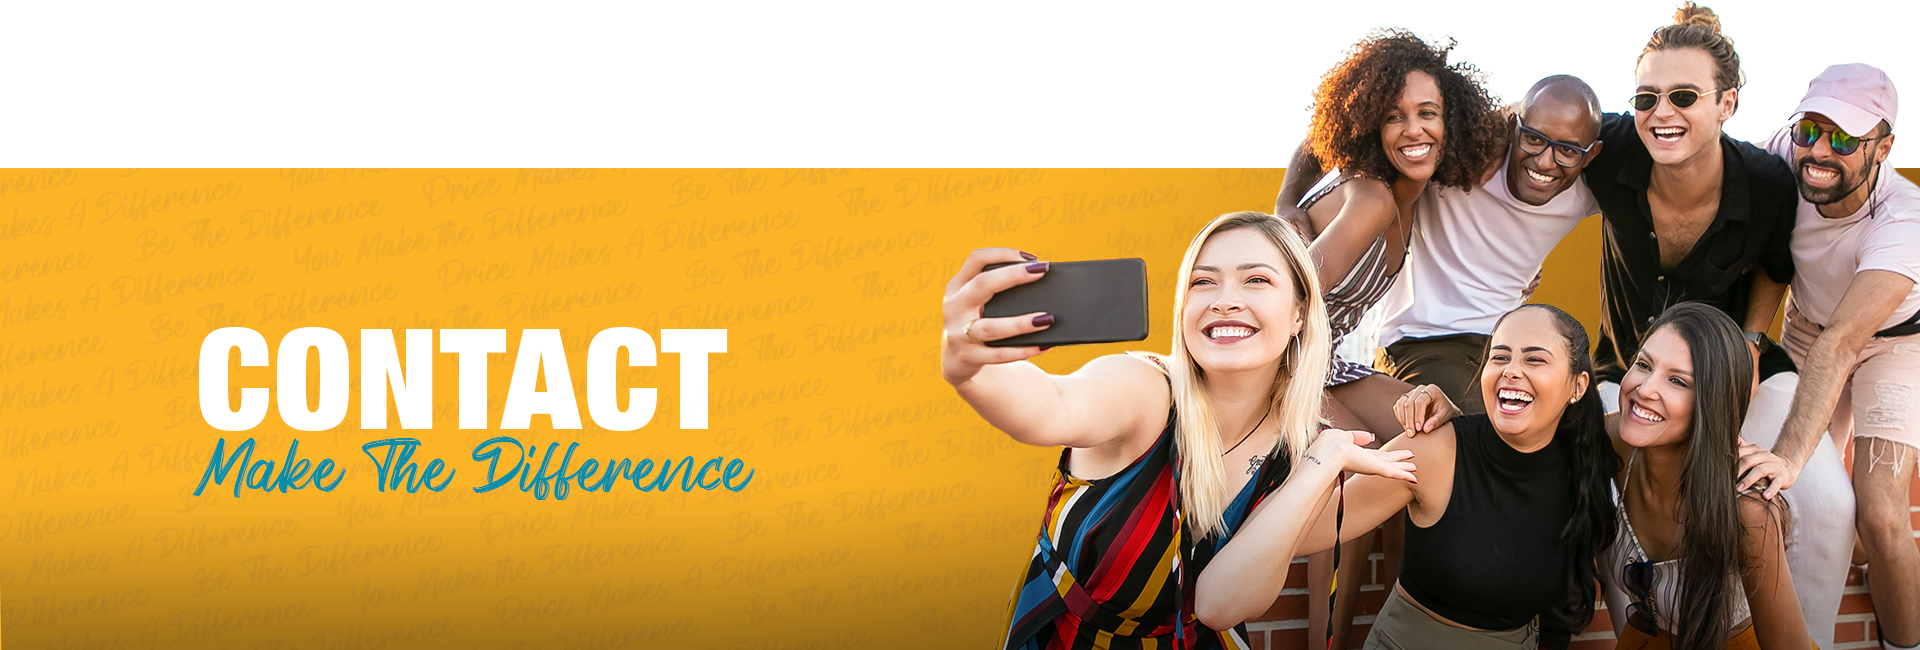 Image that Has 7 young adults taking a selfie. Yellow Background. Text that reads "Contact" "Make The Difference".